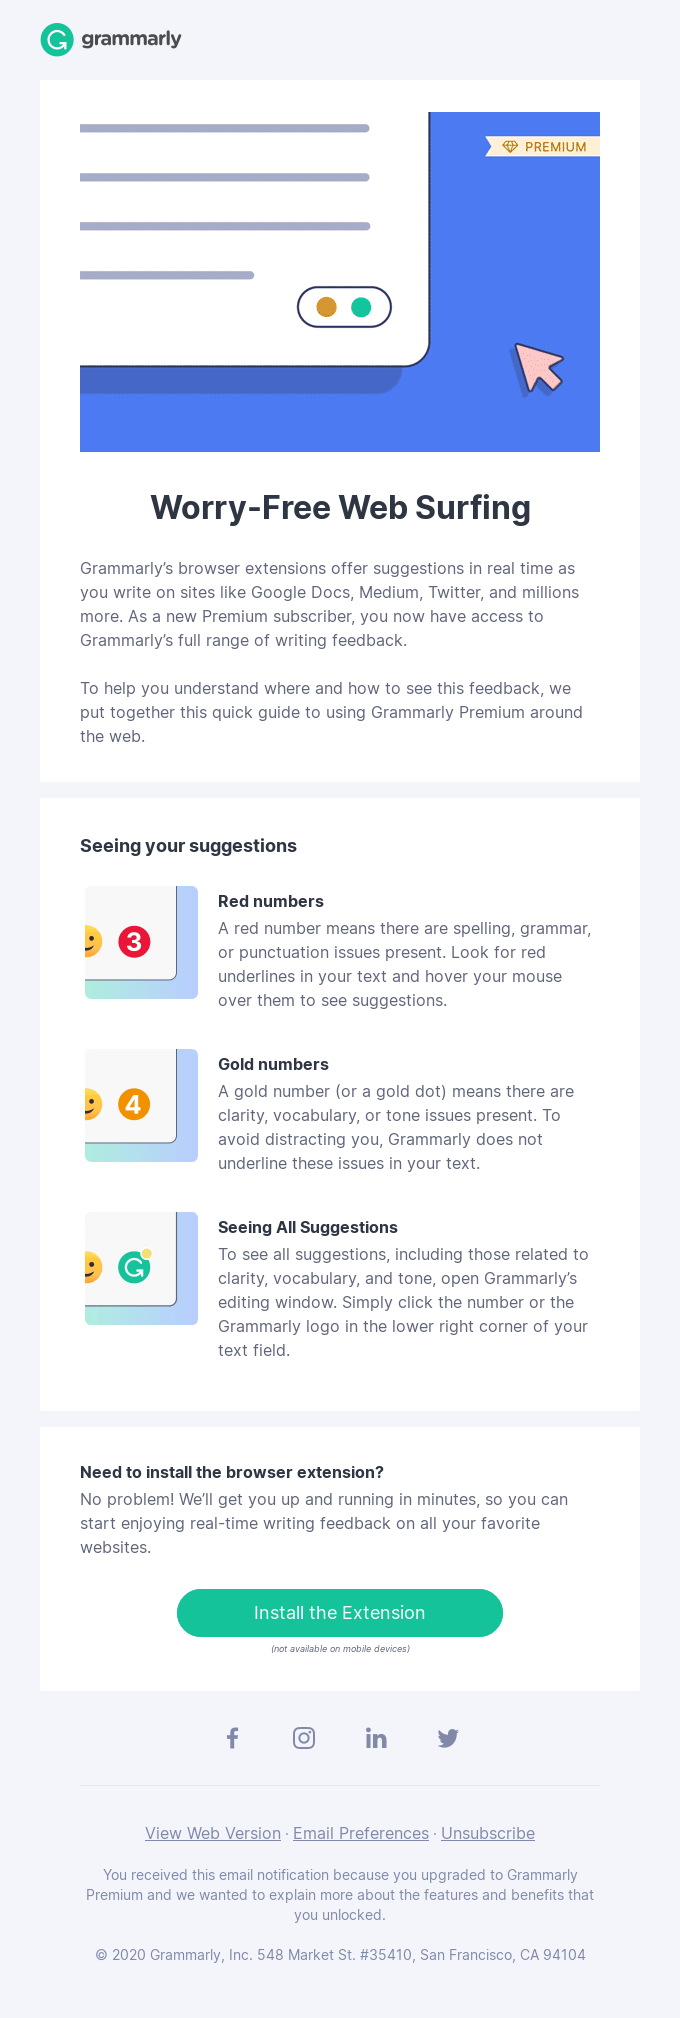 How Premium works when you surf the web - Grammarly Email Newsletter